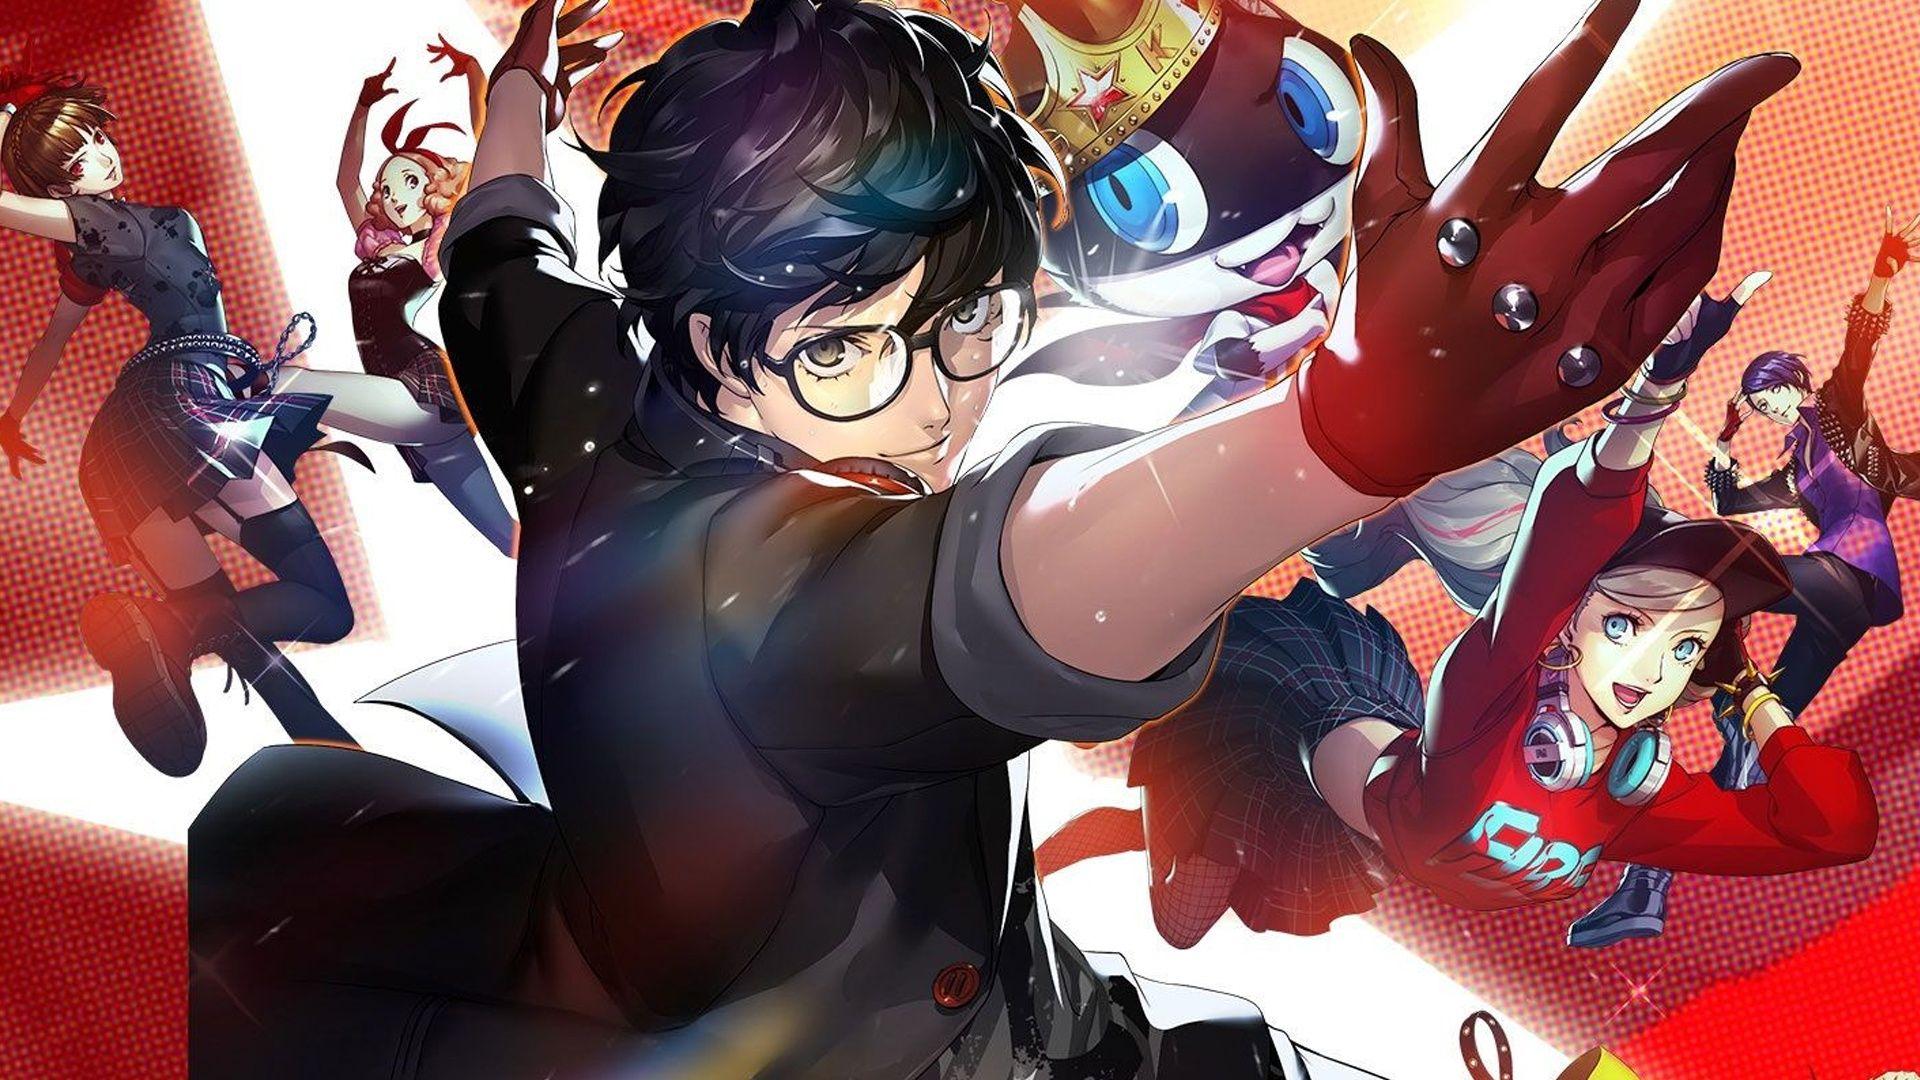 Persona 5 and Persona 3 Dancing DLC Lineup Costs More Than Both